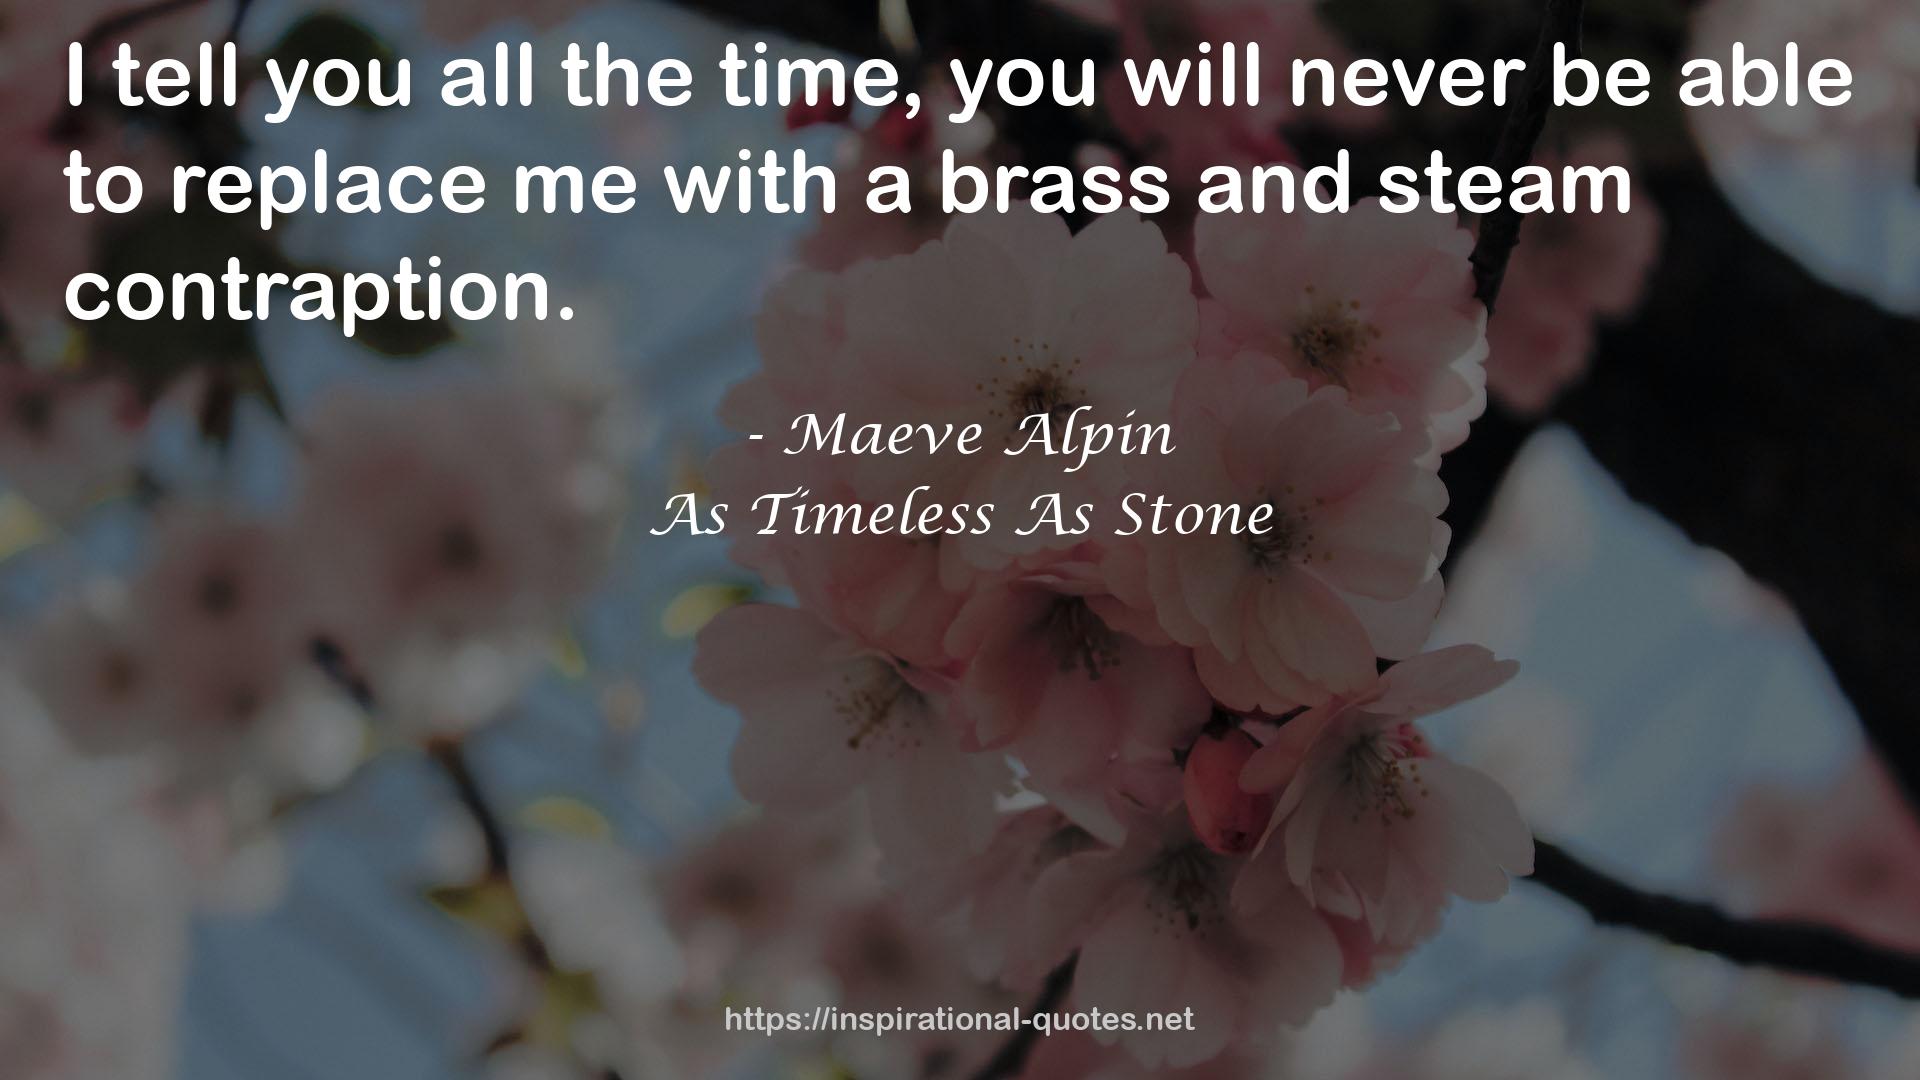 As Timeless As Stone QUOTES